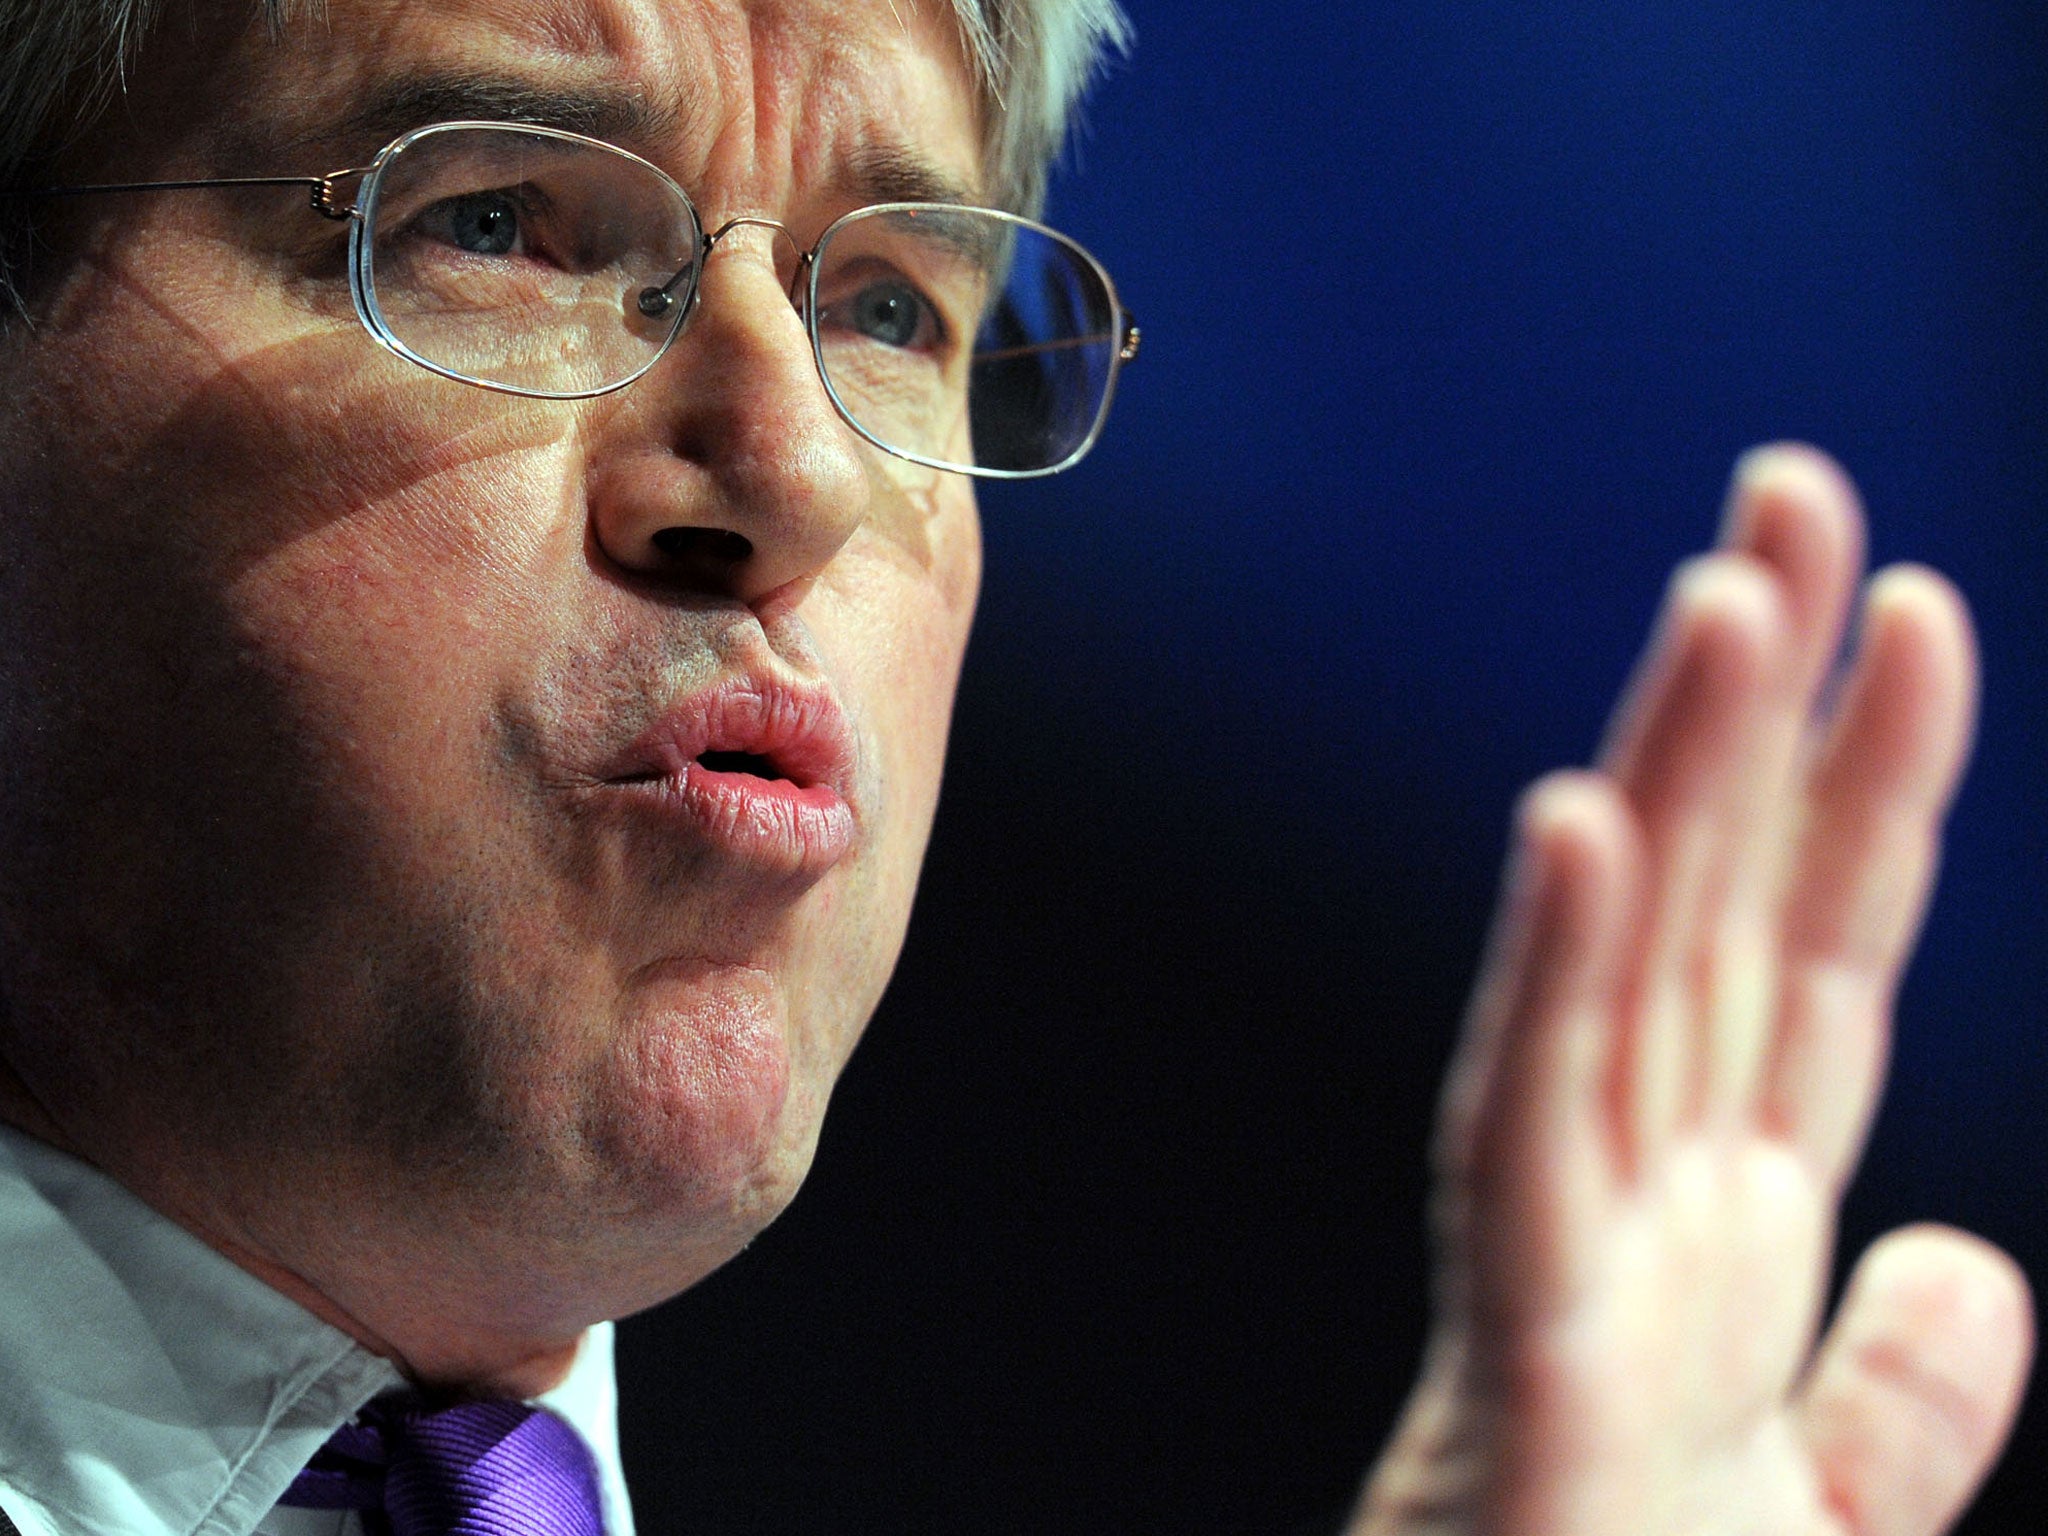 Andrew Mitchell speaks during the final day of the Conservative Party Conference in Manchester on October 8, 2009.